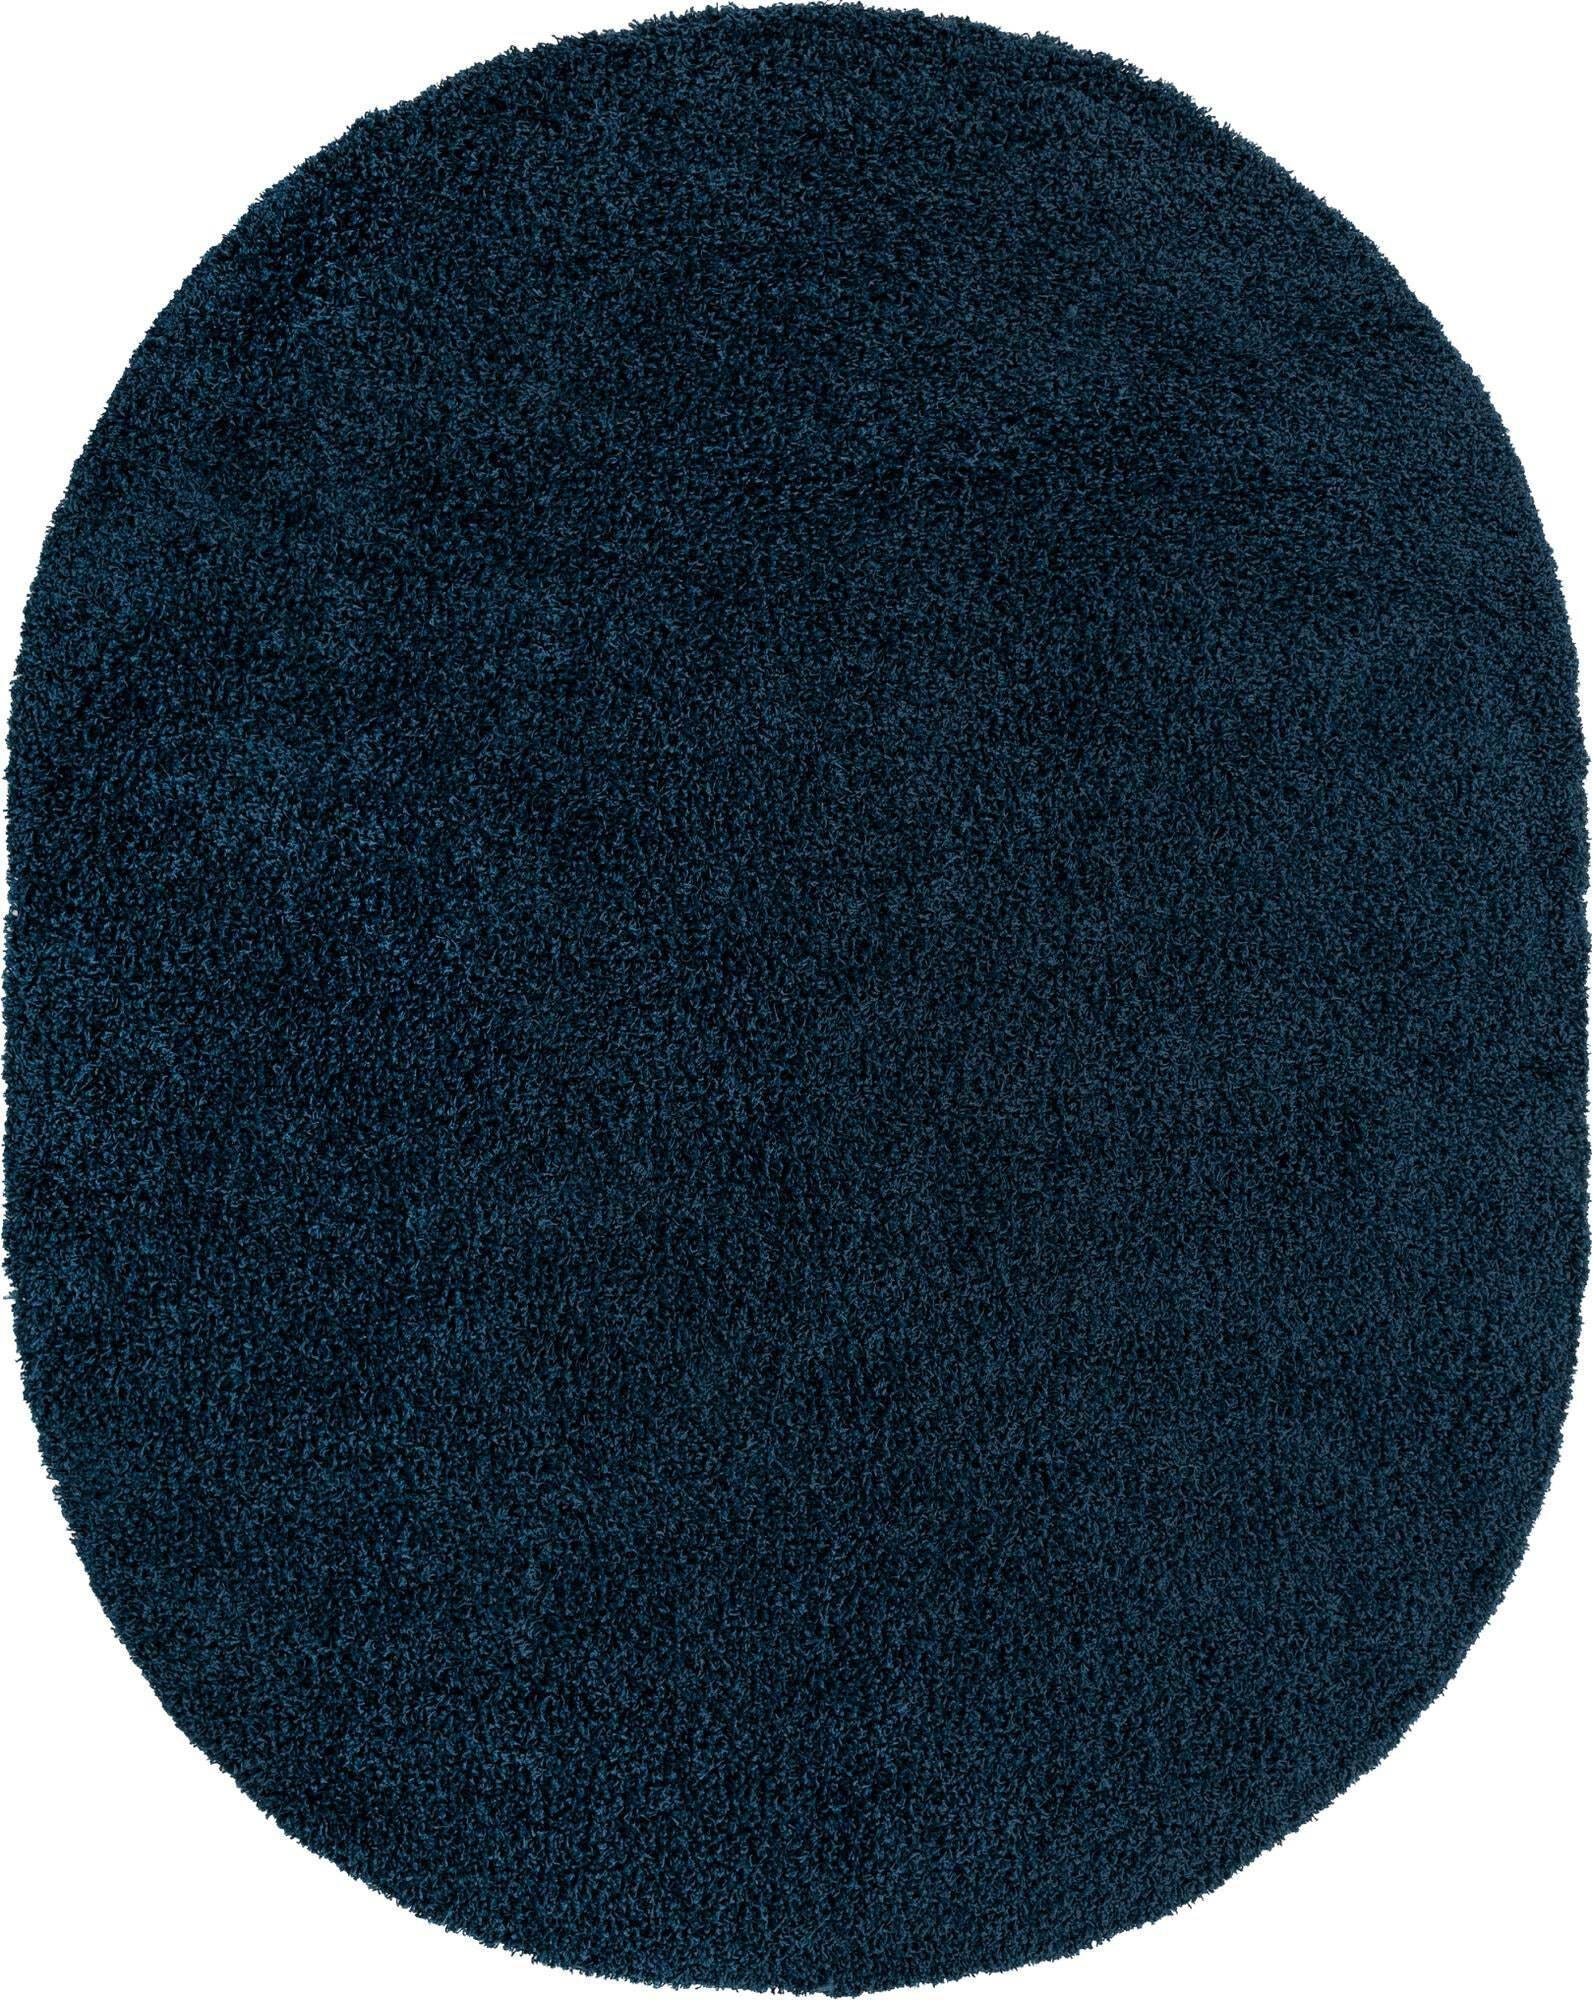 Unique Loom Indoor Rugs - Solid Shag Solid Oval 8x10 Oval Rug Navy Blue